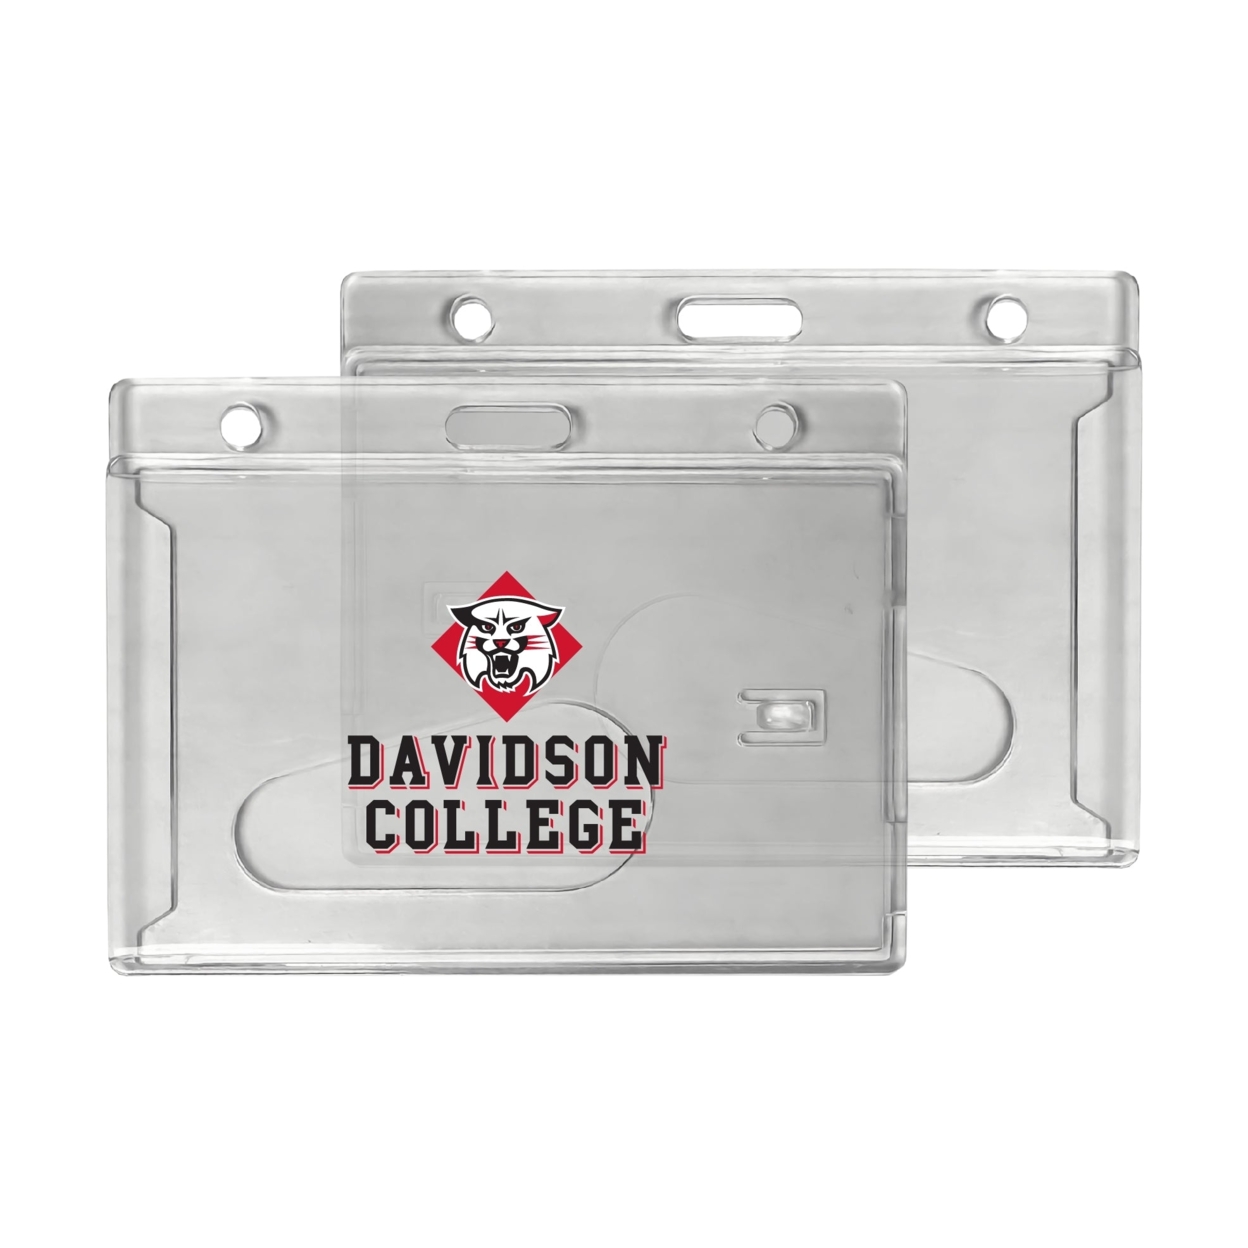 Davidson College Clear View ID Holder